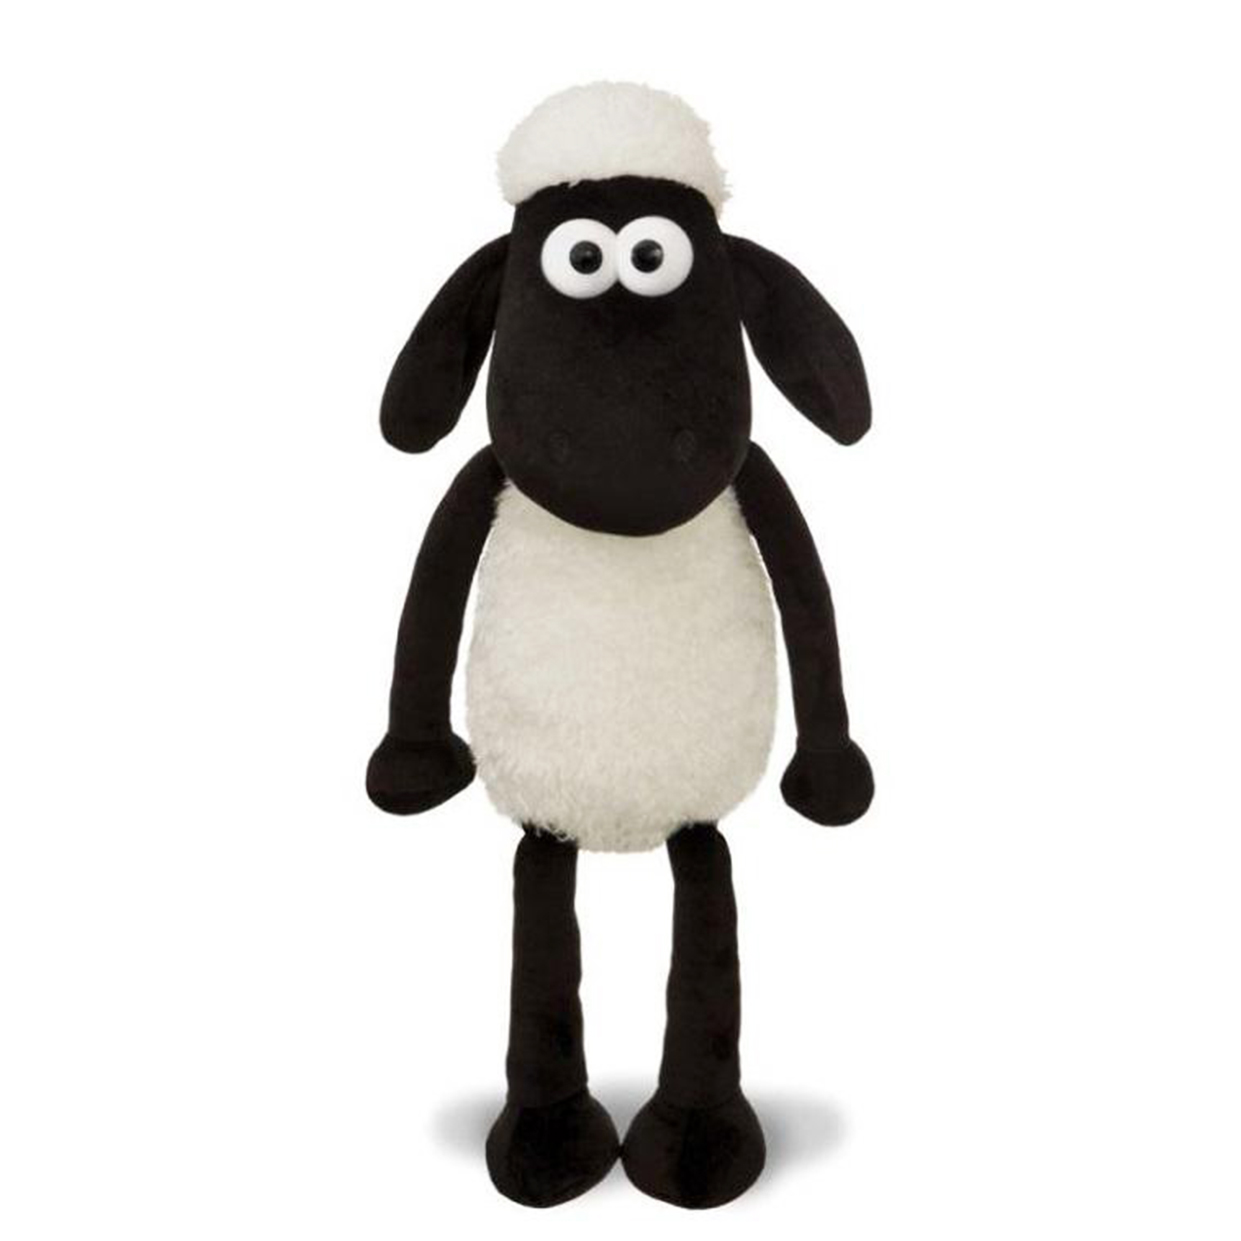 Shaun the Sheep - sent on March 2nd, 2022